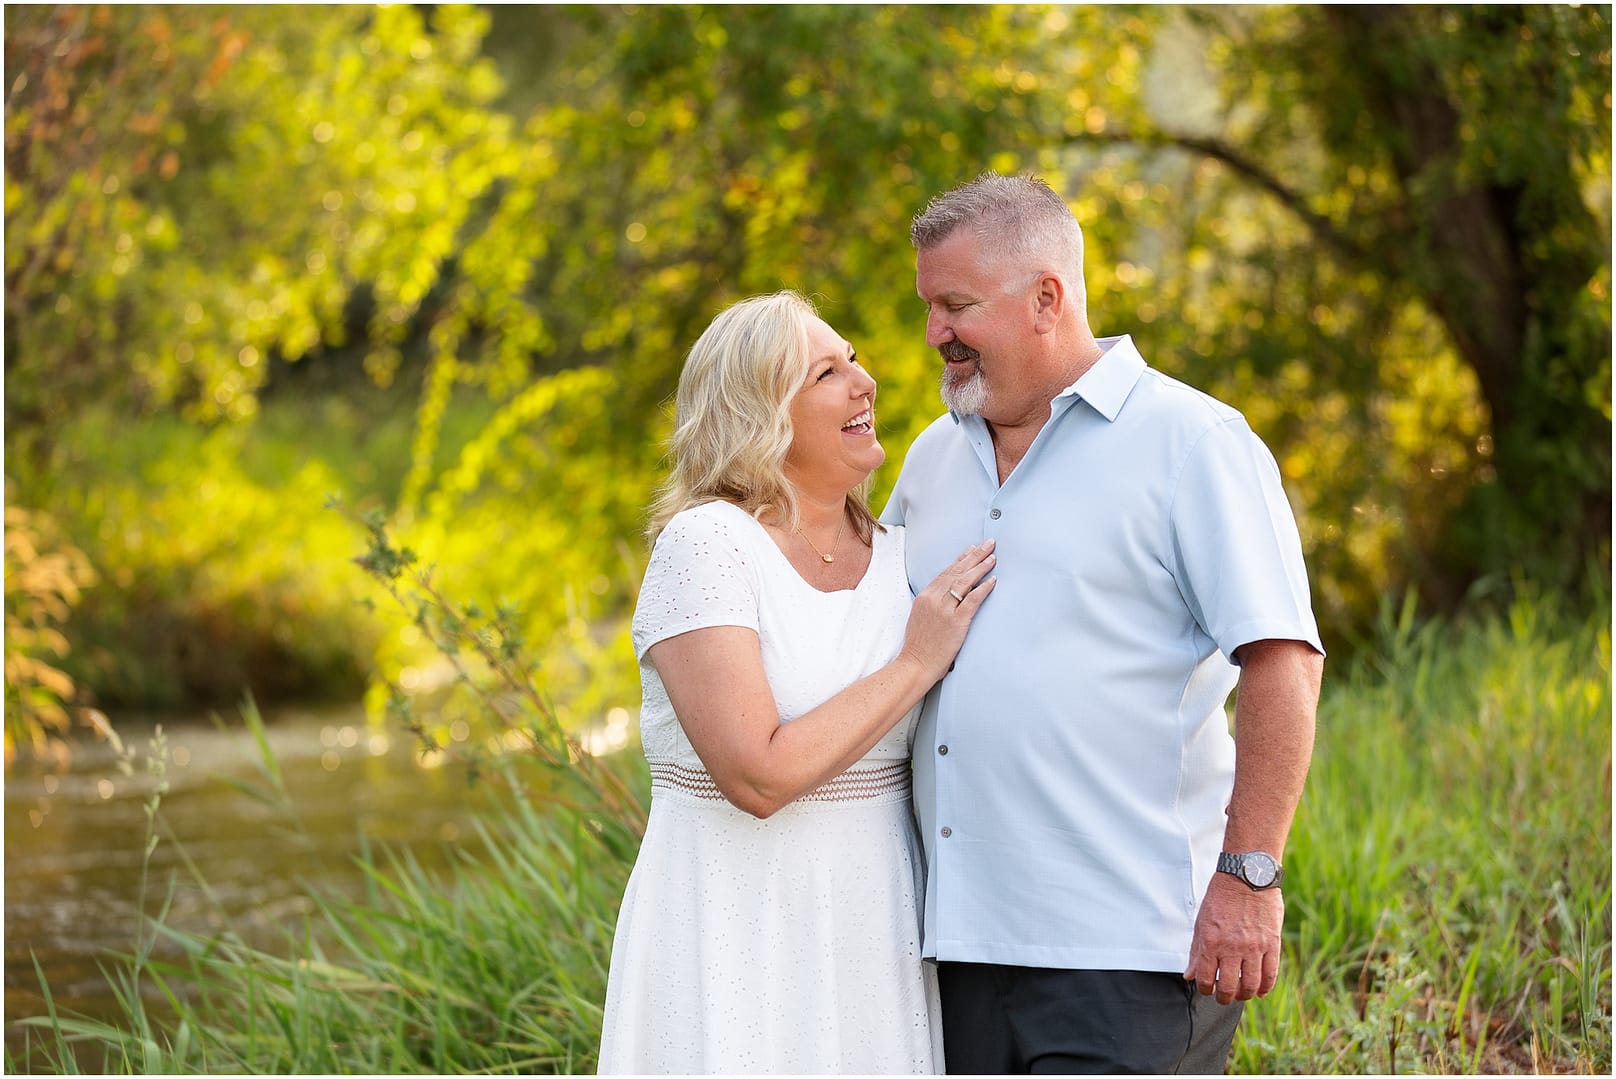 Mom & Dad smile at one another during Boise family photo session. Photo by Tiffany Hix Photography.